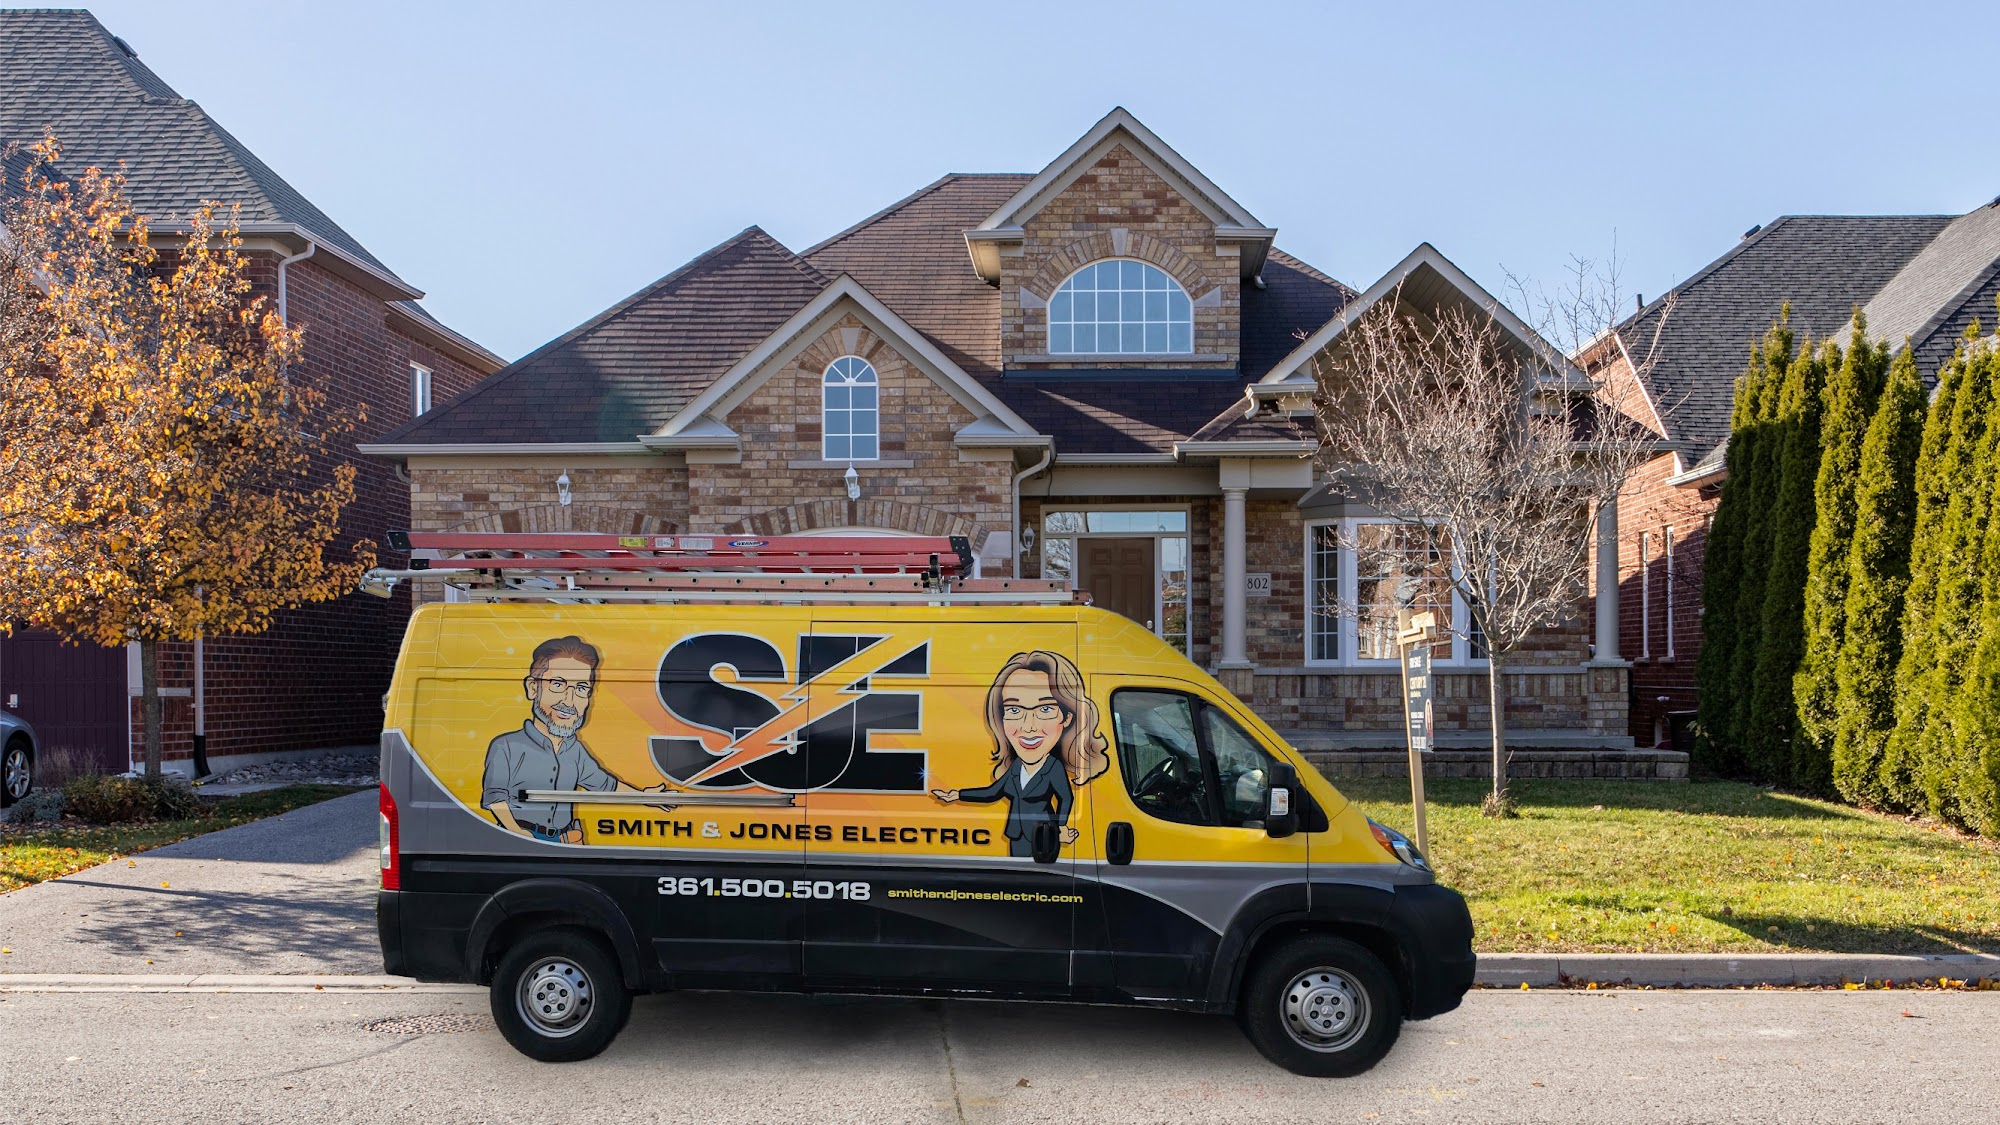 Smith and Jones Electrical Contractors in Corpus Christi, Tx